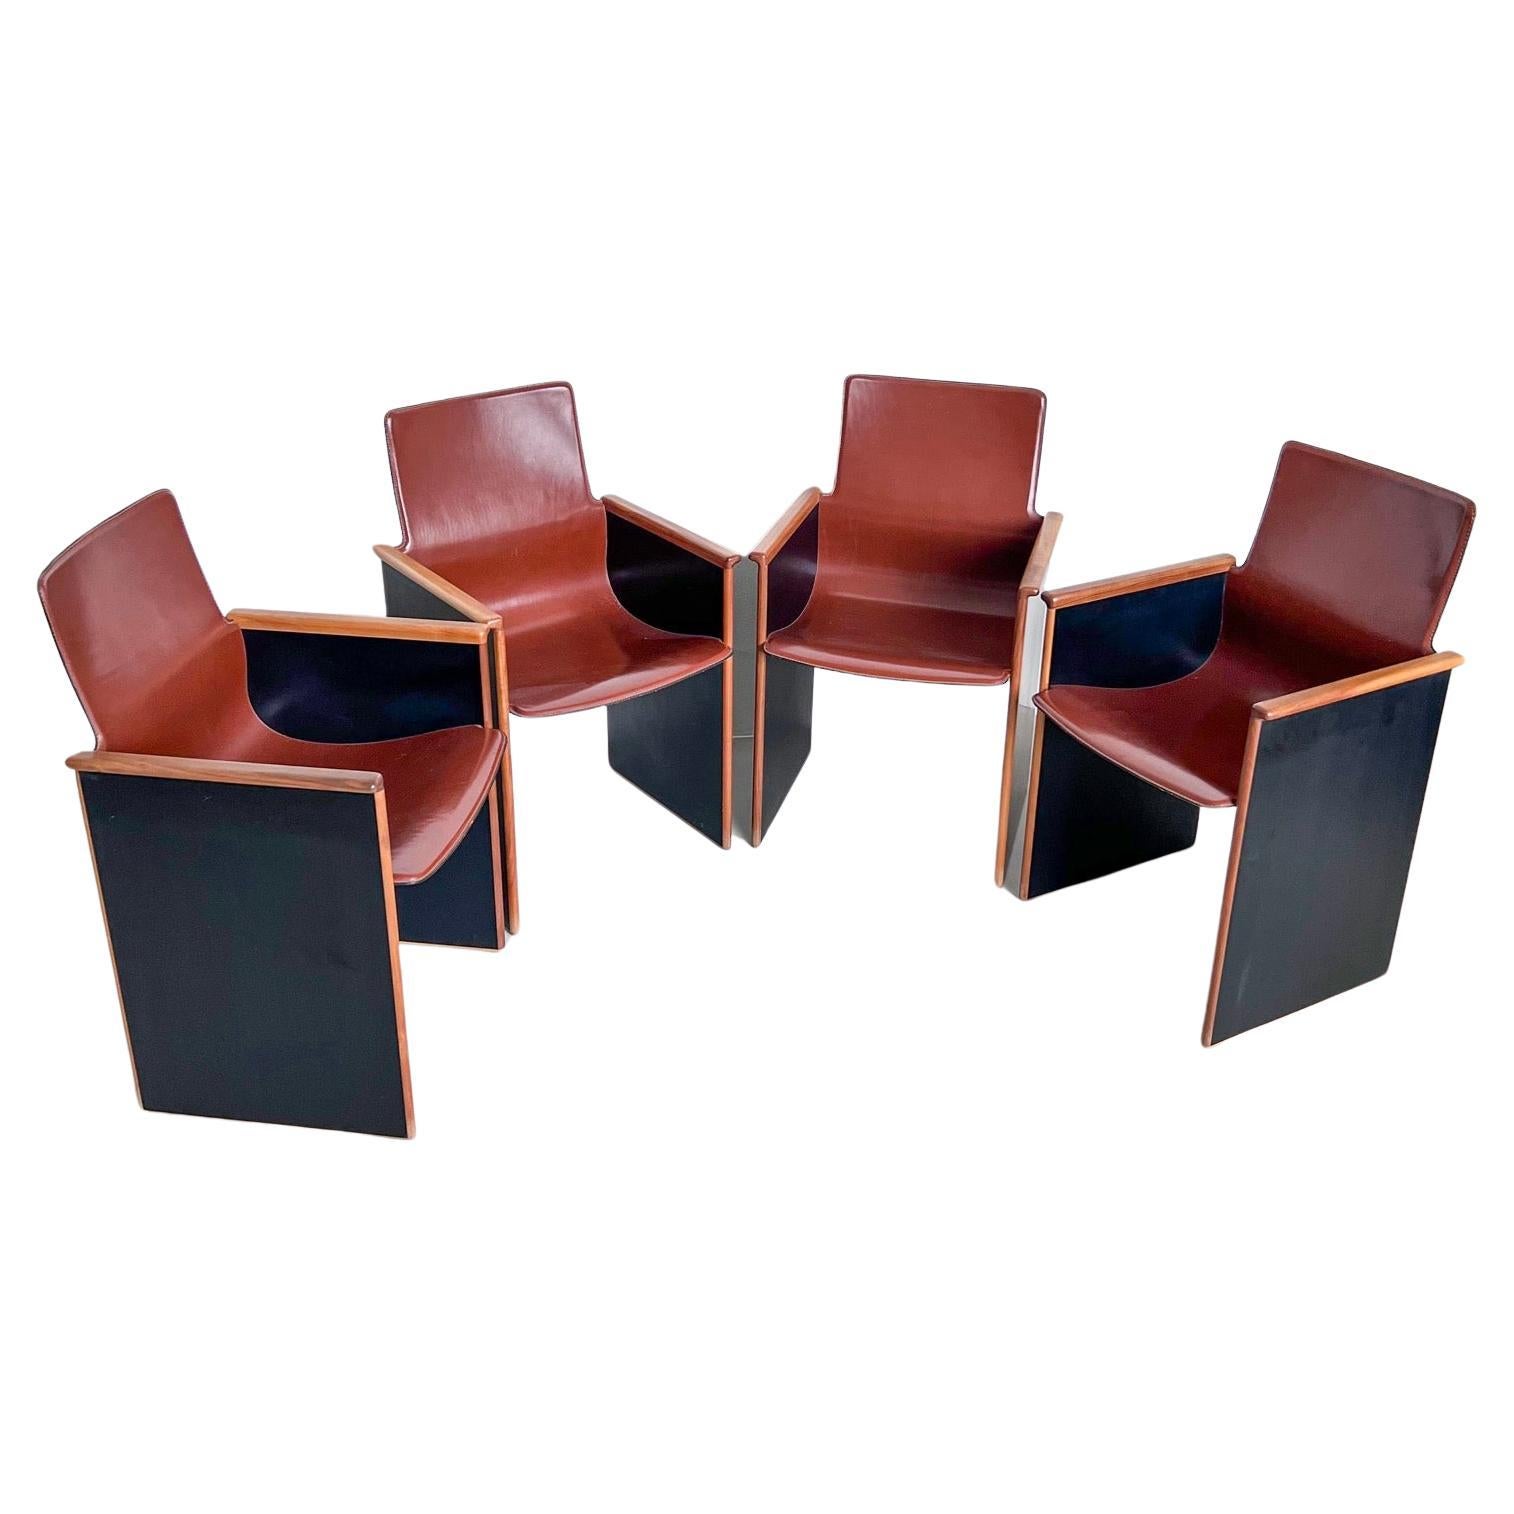 Afra and Tobia Scarpa, Stildomus Segesto dining chairs, set of four For Sale